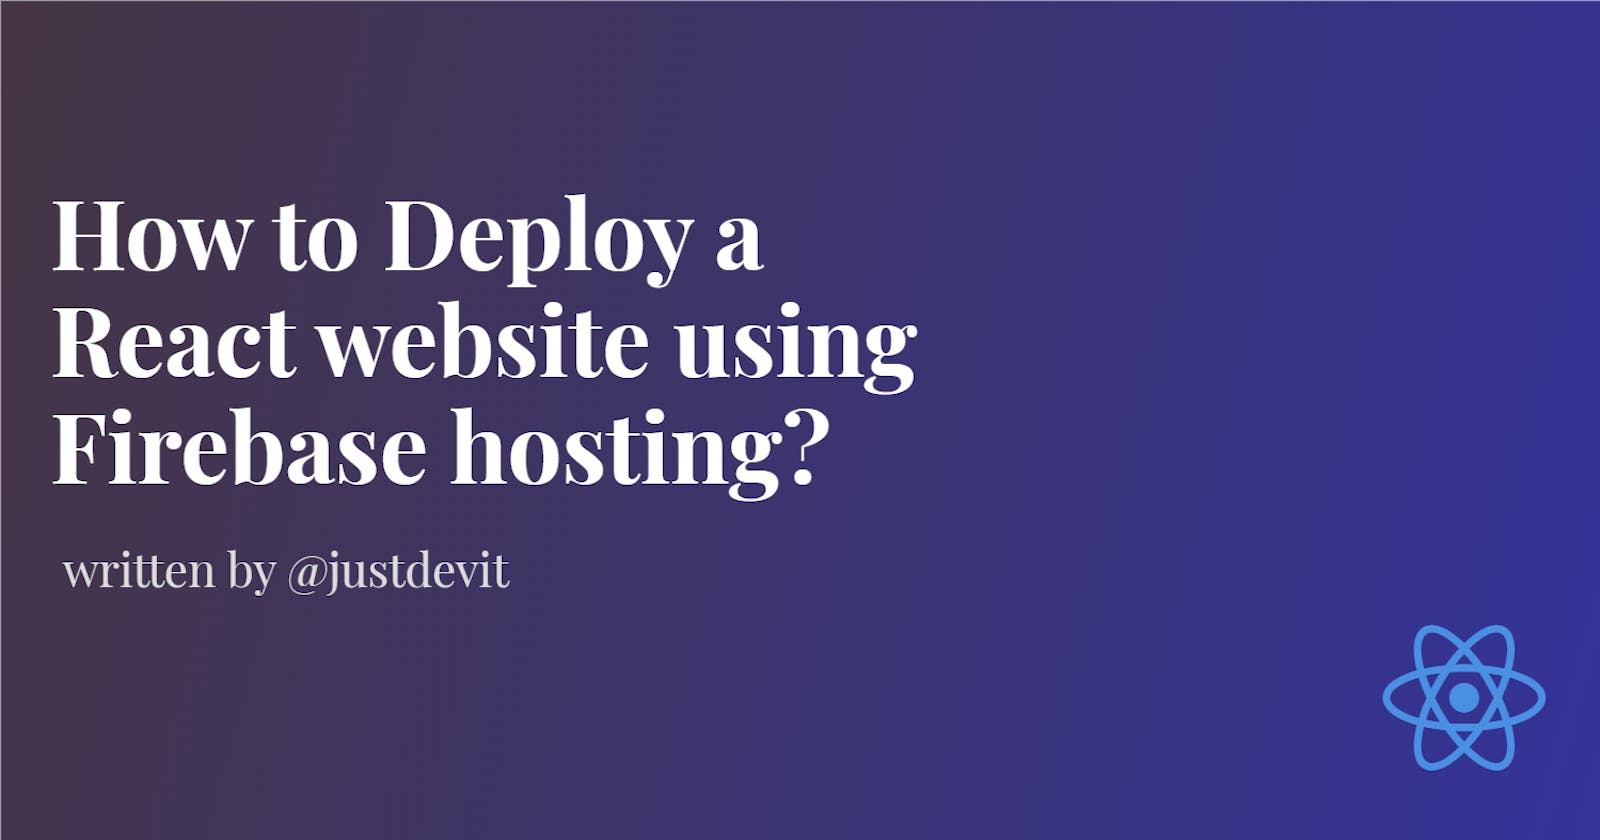 How to Deploy a React website using Firebase hosting?